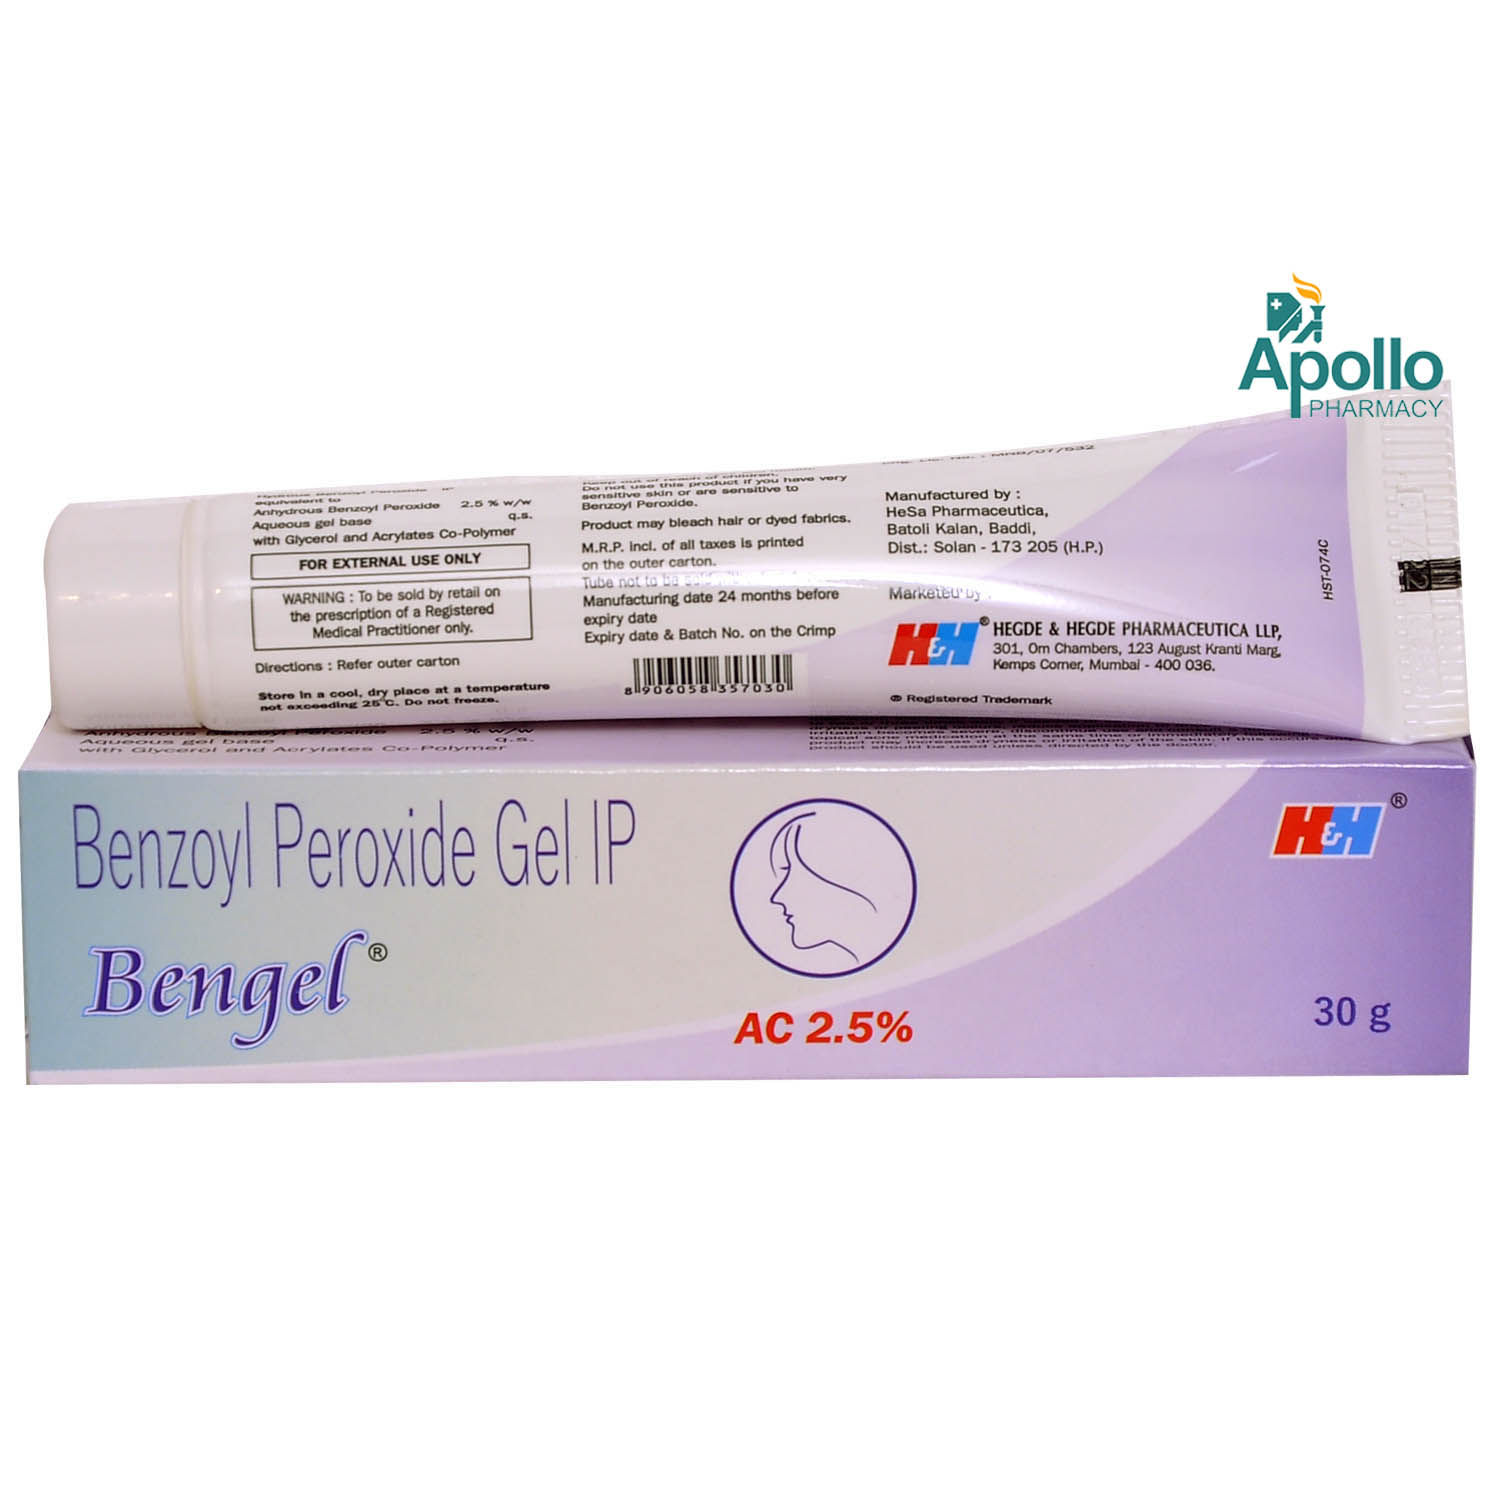 Bengel AC 2.5% gm Price, Uses, Effects, Composition - Pharmacy